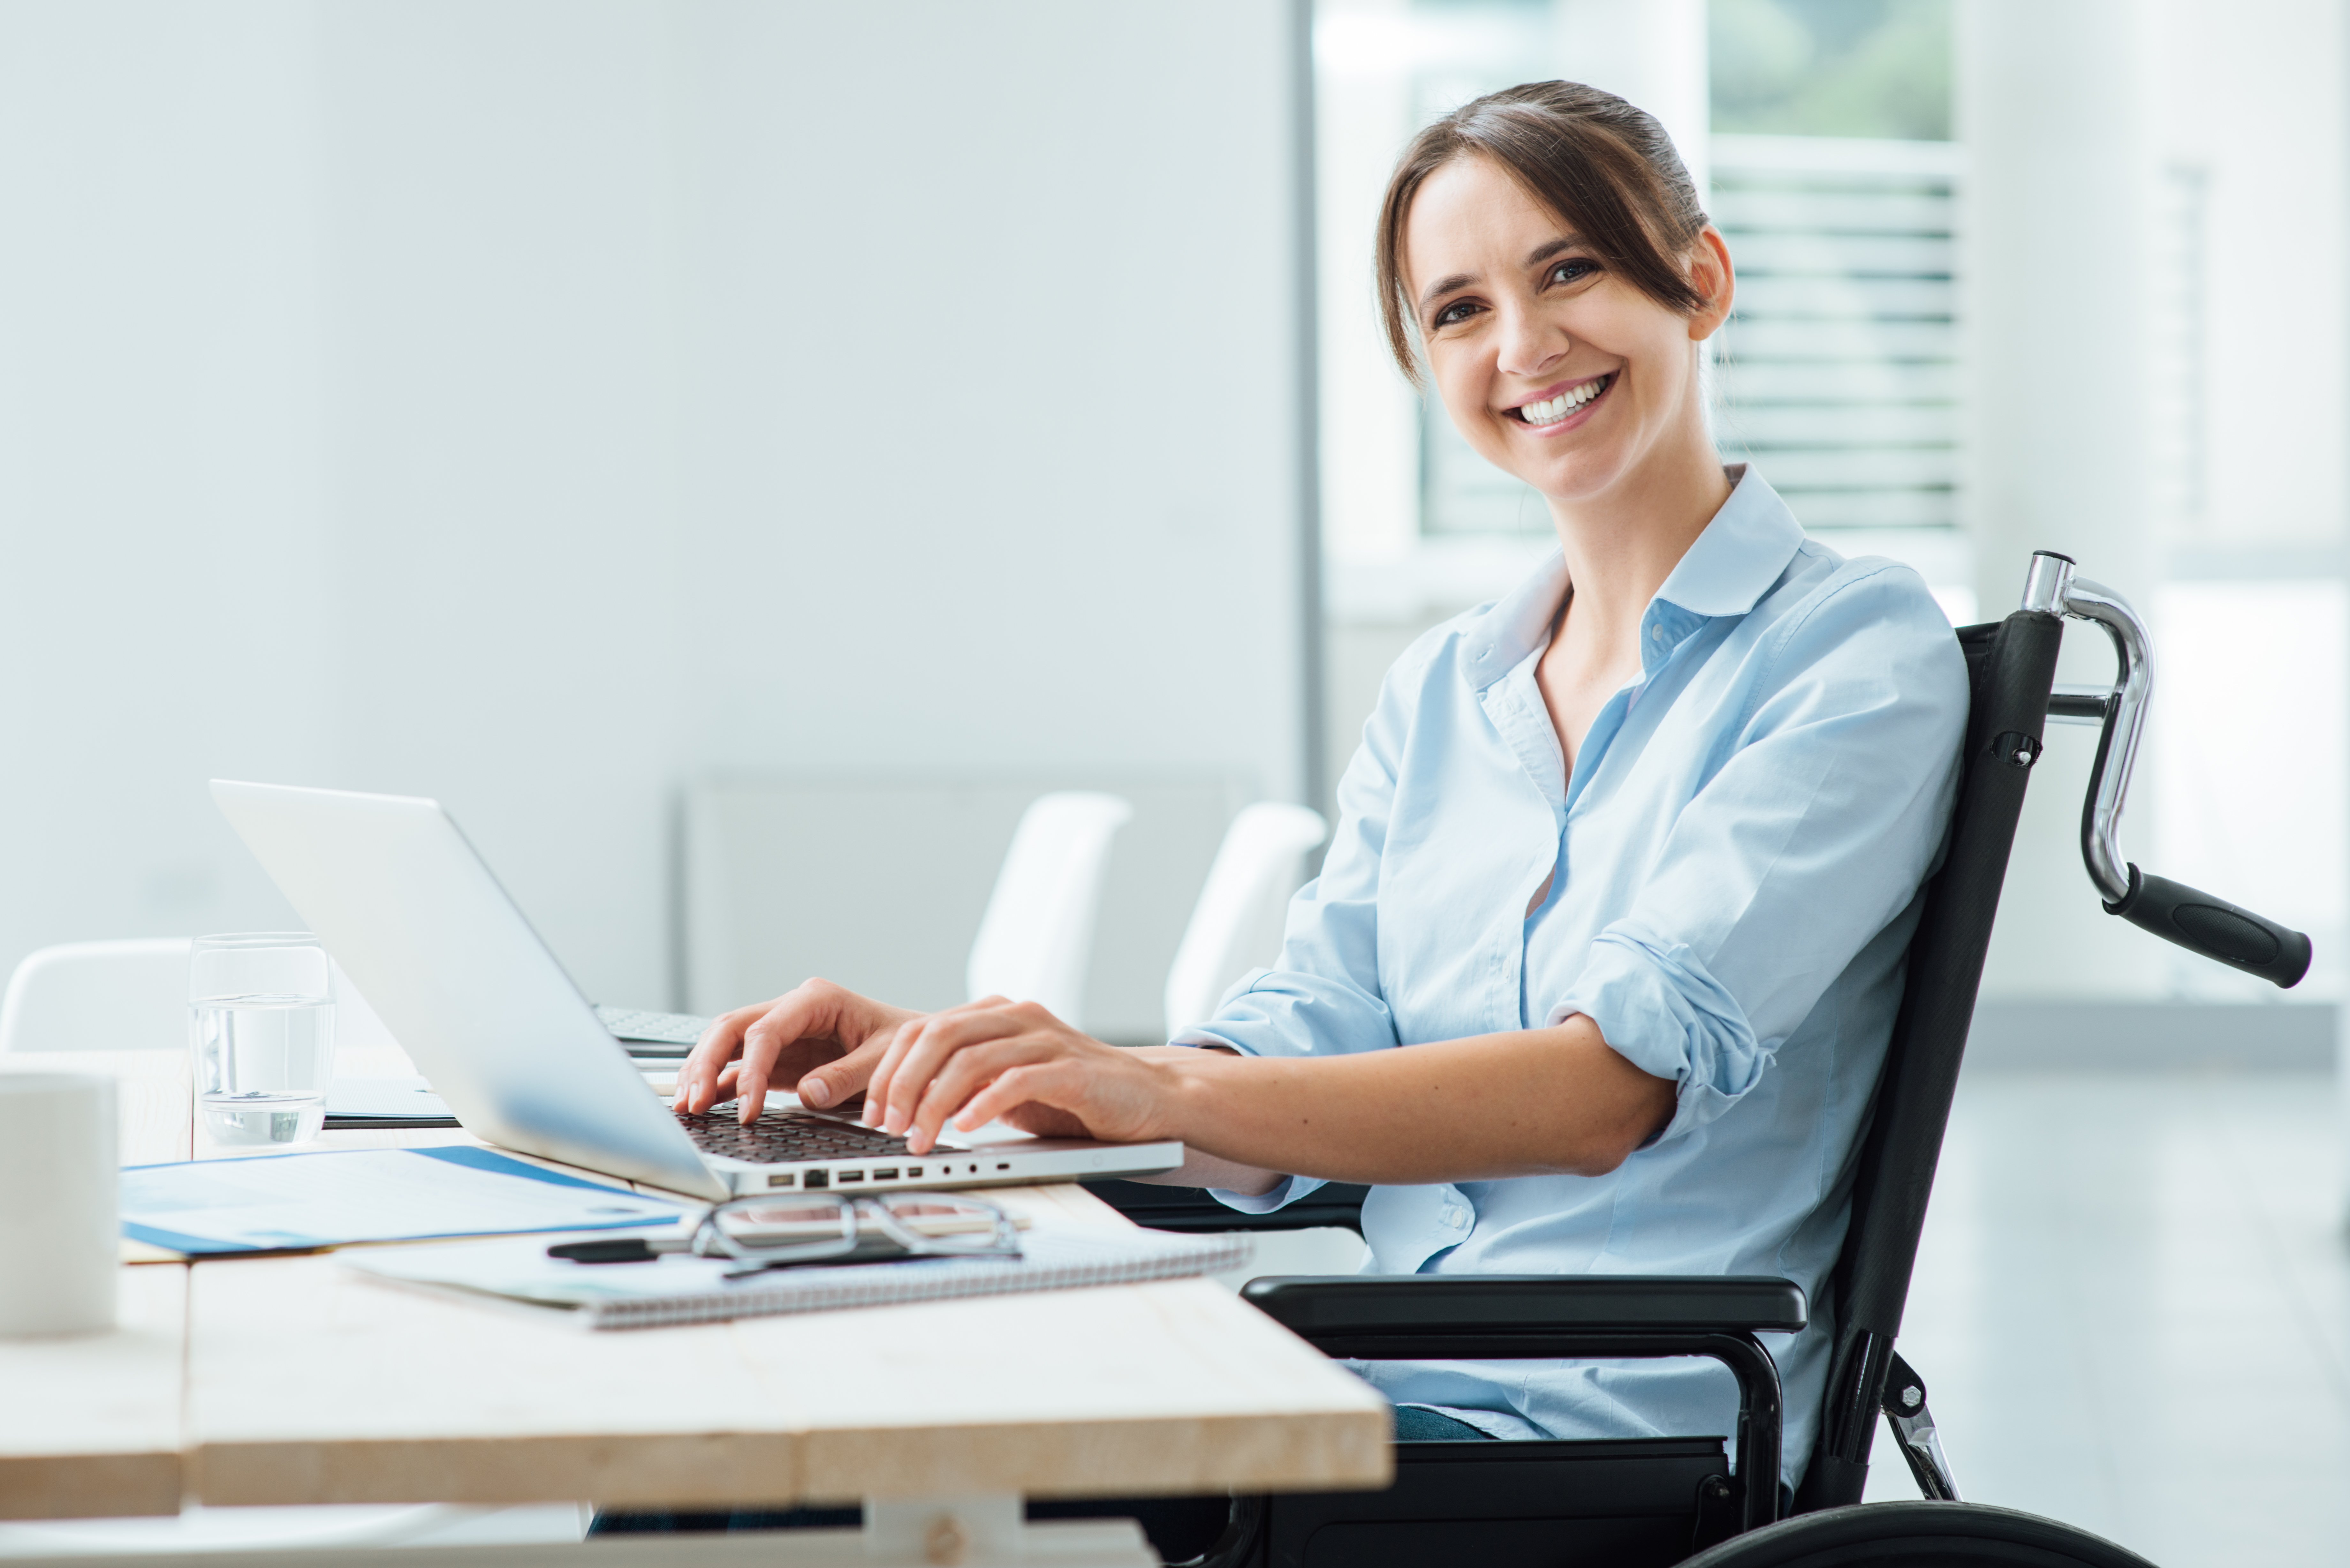 A woman sitting in front of her laptop smiling.